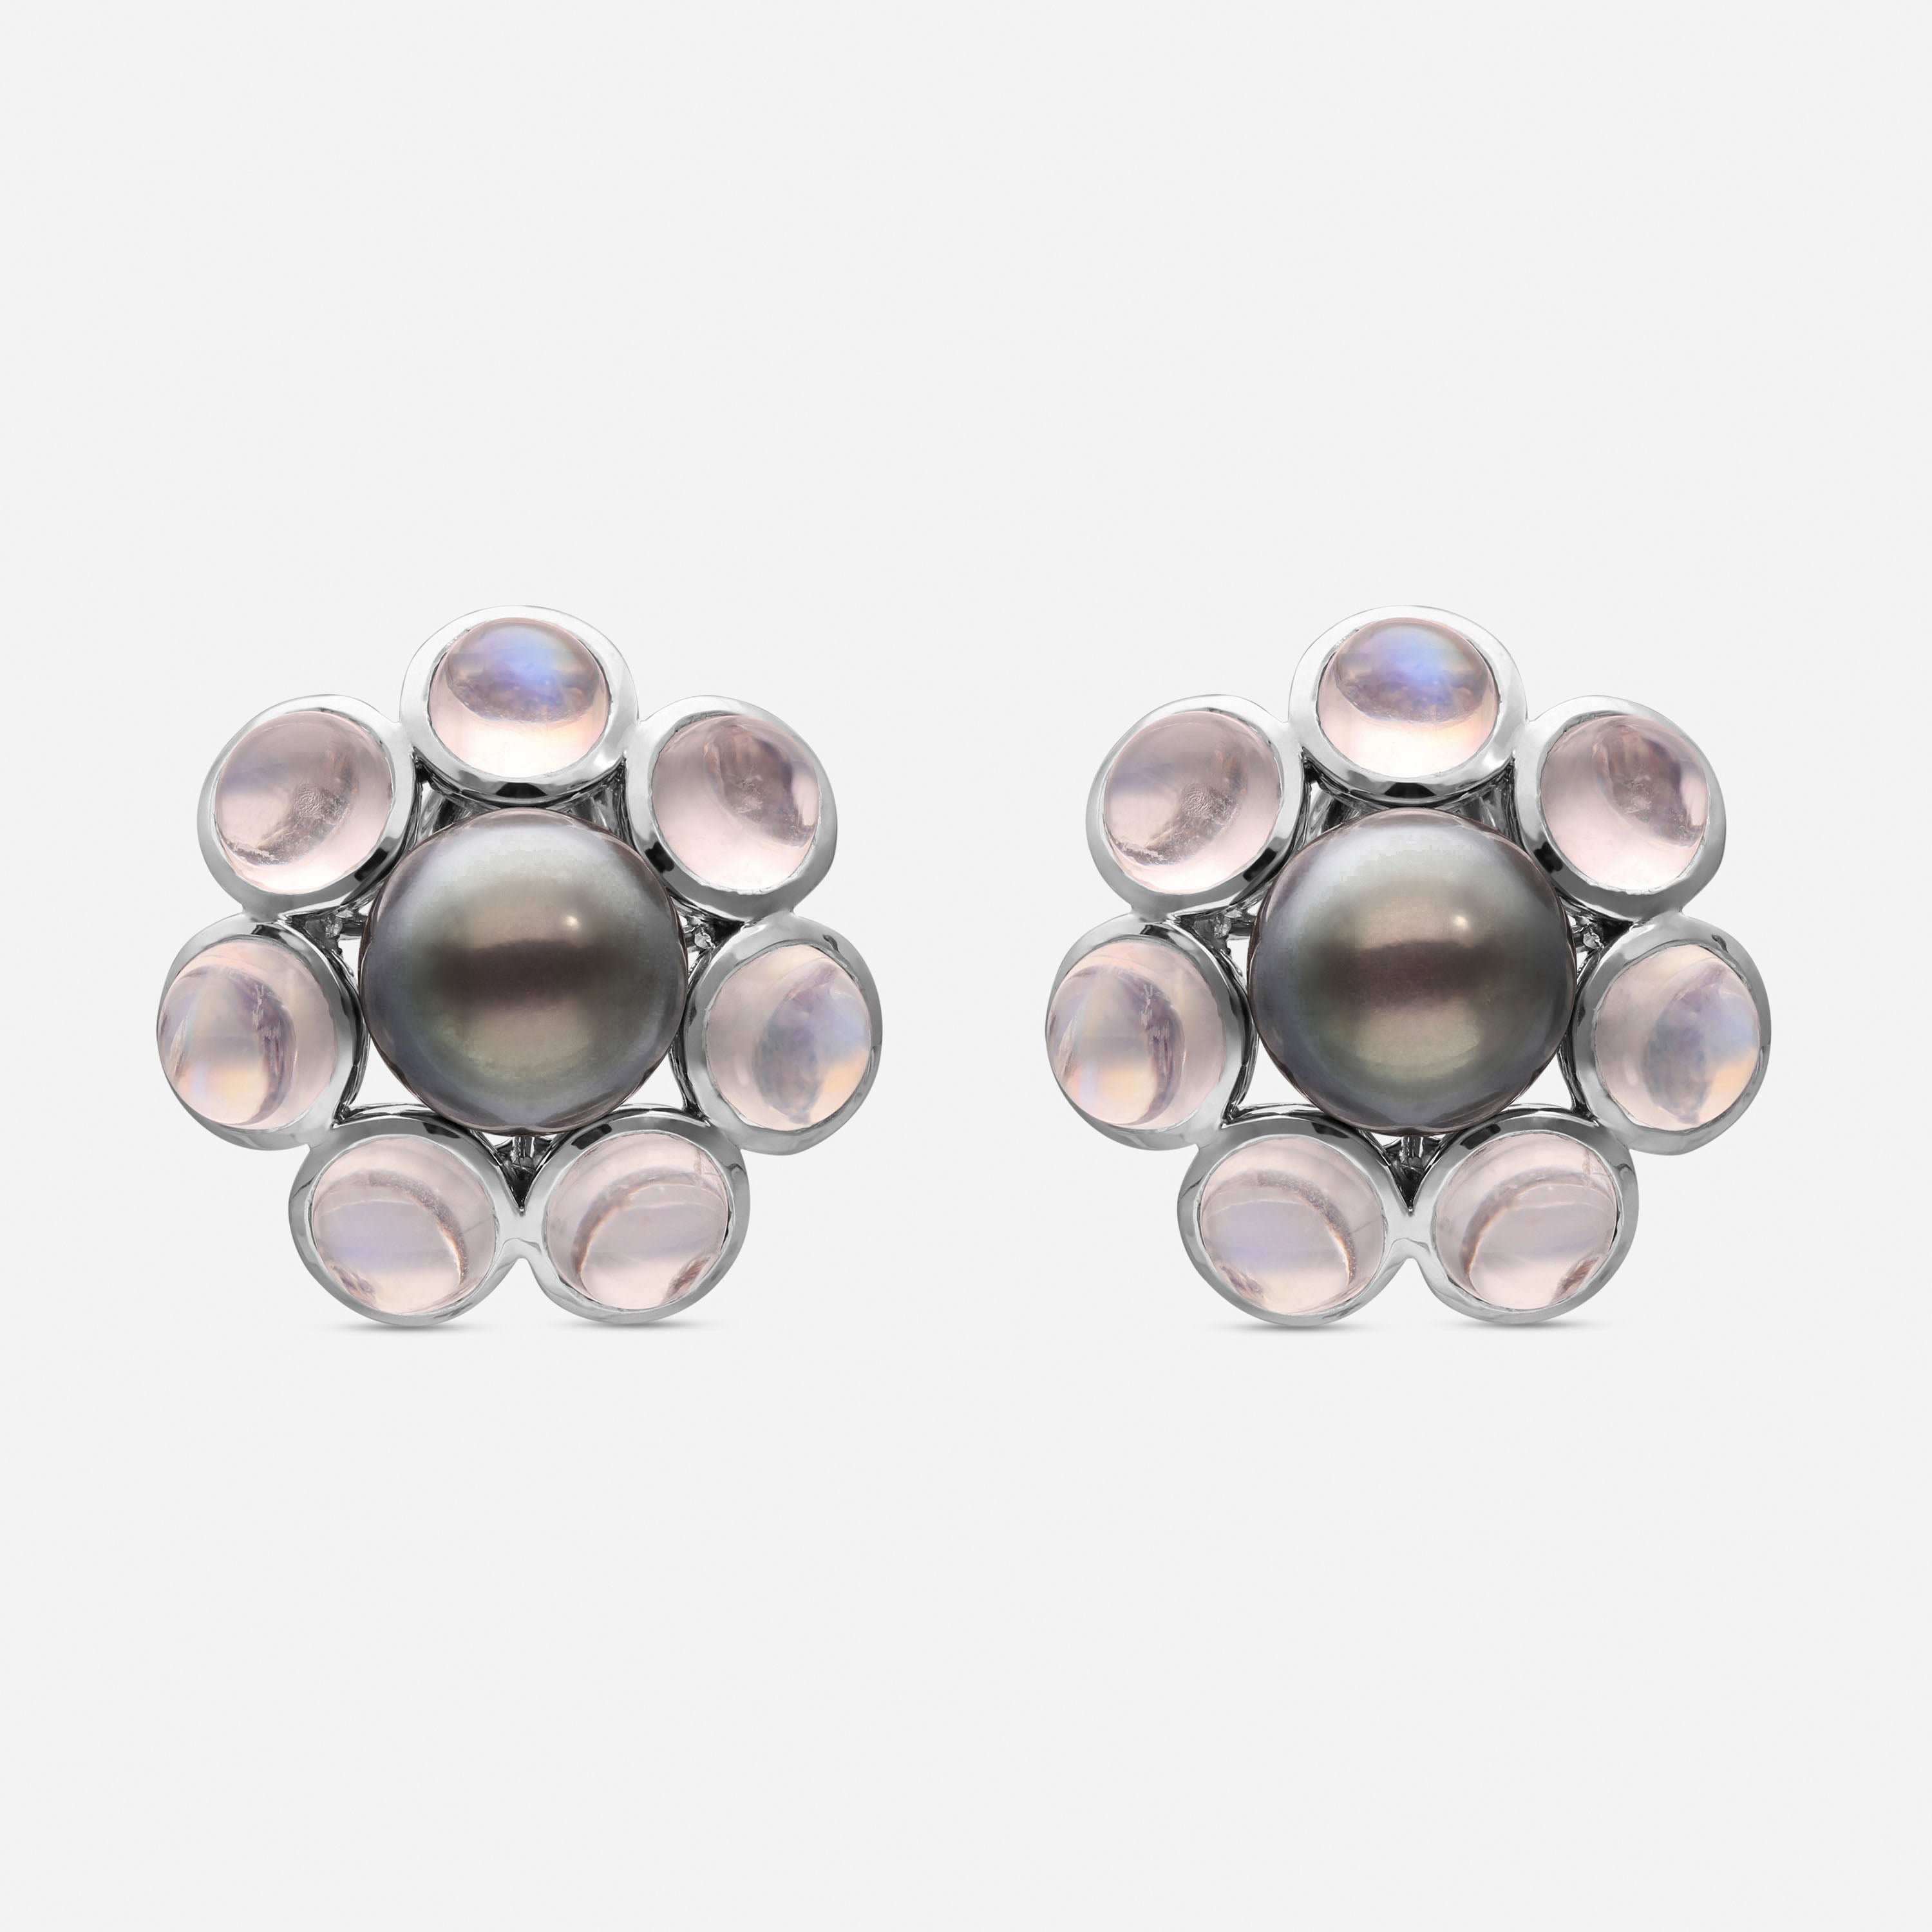 Assael 18k White Gold, Tahitian Cultured Pearl And Moonstone Huggie Earrings In Gray